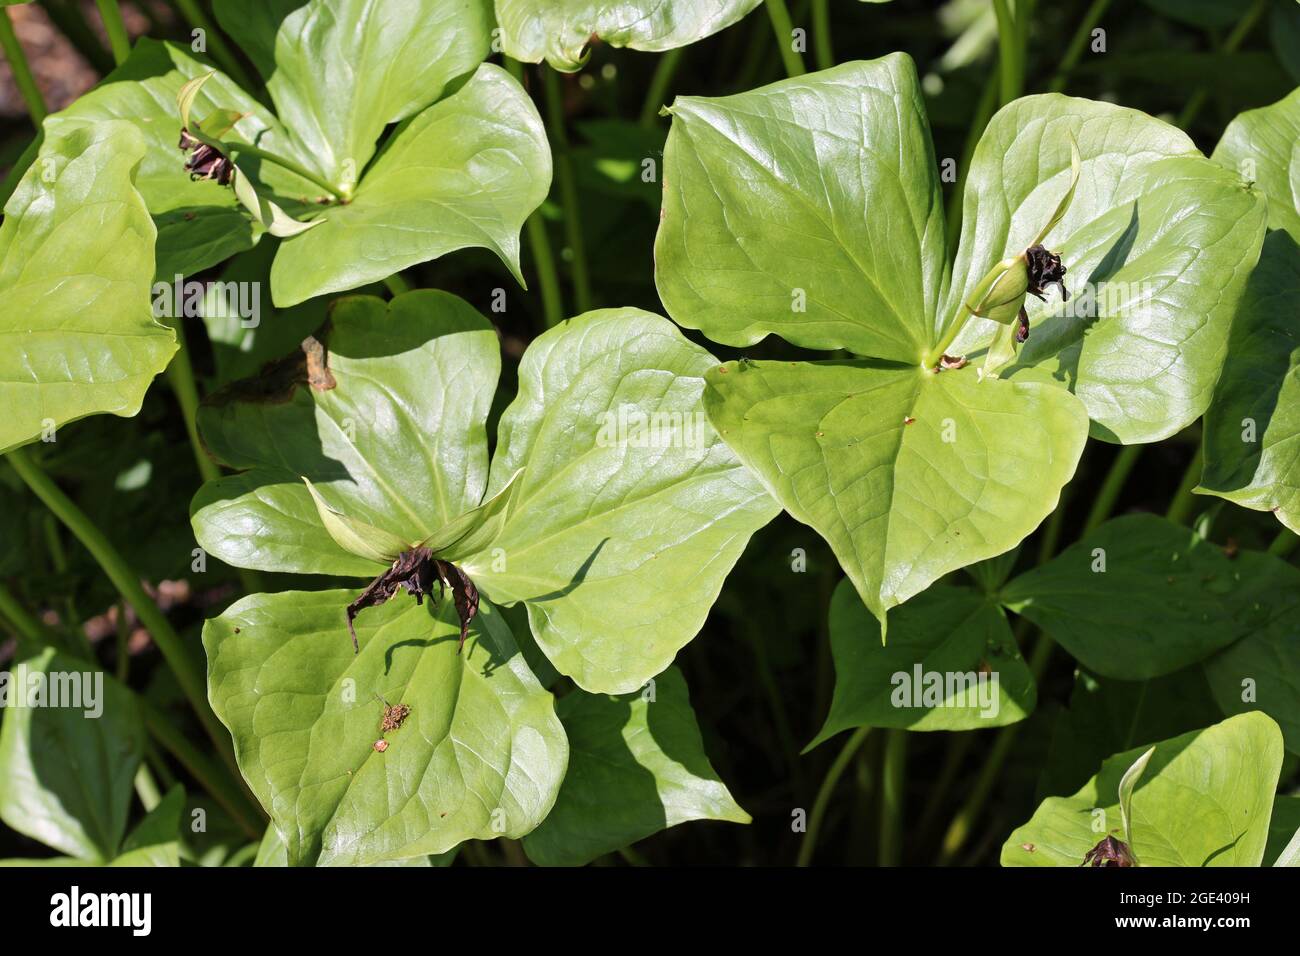 Birthwort or wake robin, Trillium erectum, leaves and fading flowers with a dark blurred background of leaves. Stock Photo